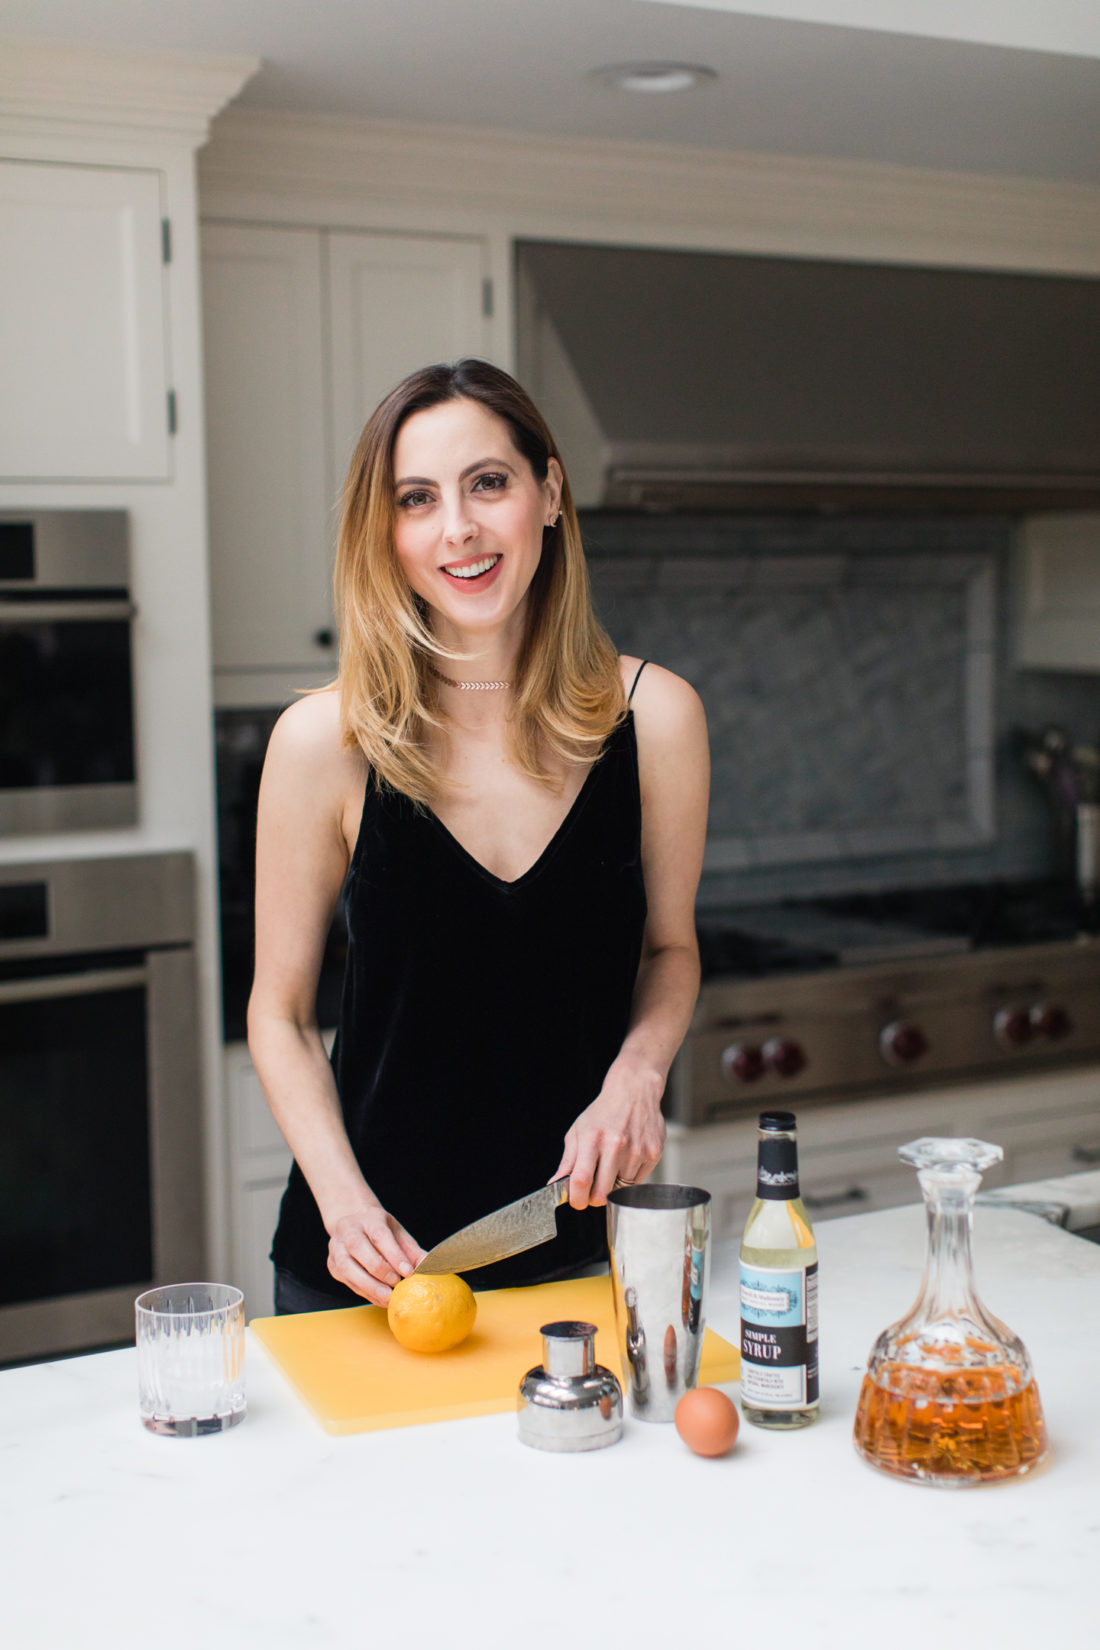 Eva Amurri Martino begins to assemble the ingredients for a whiskey sour in the kitchen of her Connecticut home